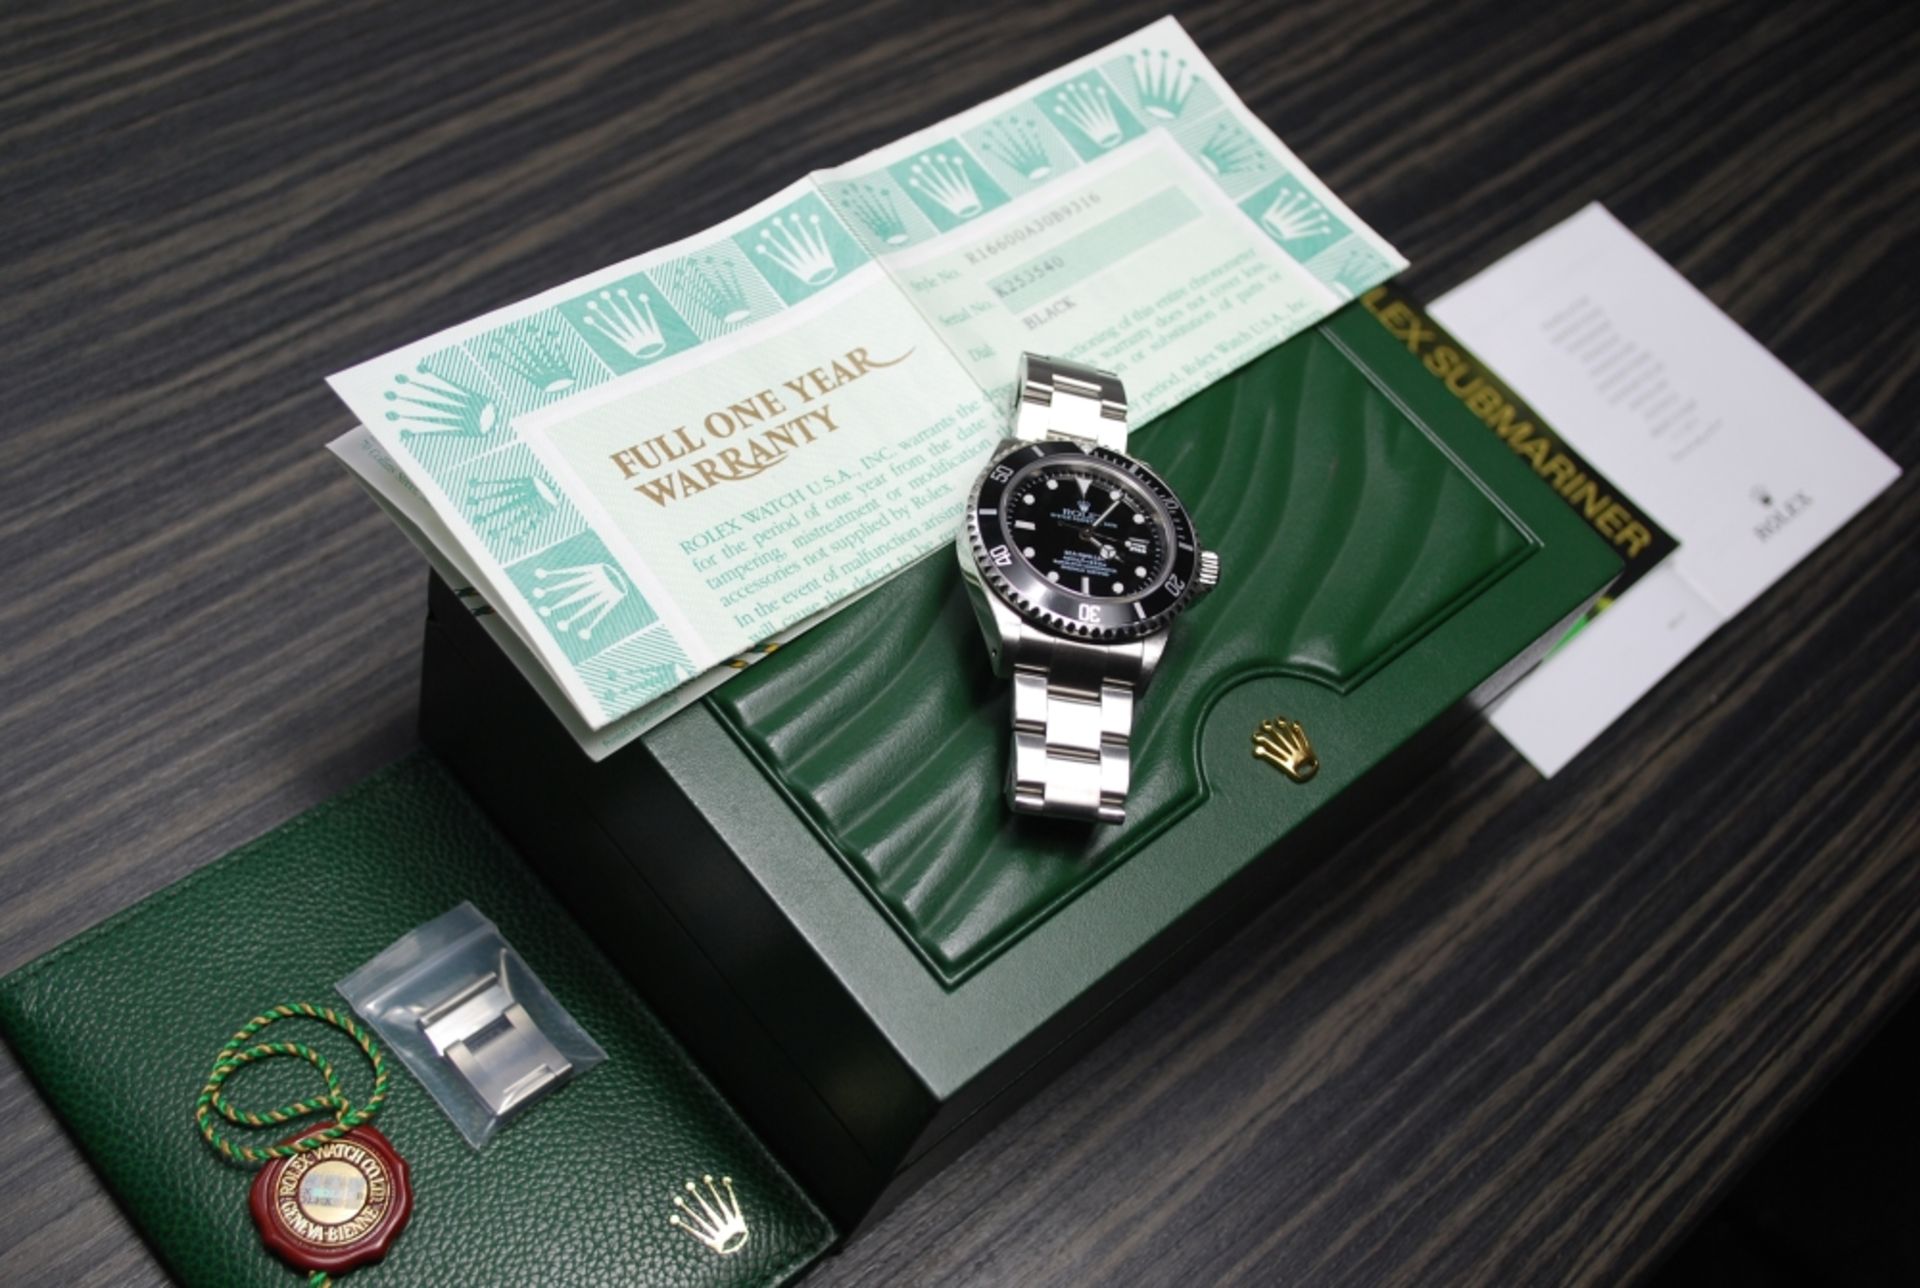 Rolex 16600 Sea Dweller - Complete with original Box & Papers - Current RRP: £6,450 - Image 2 of 4